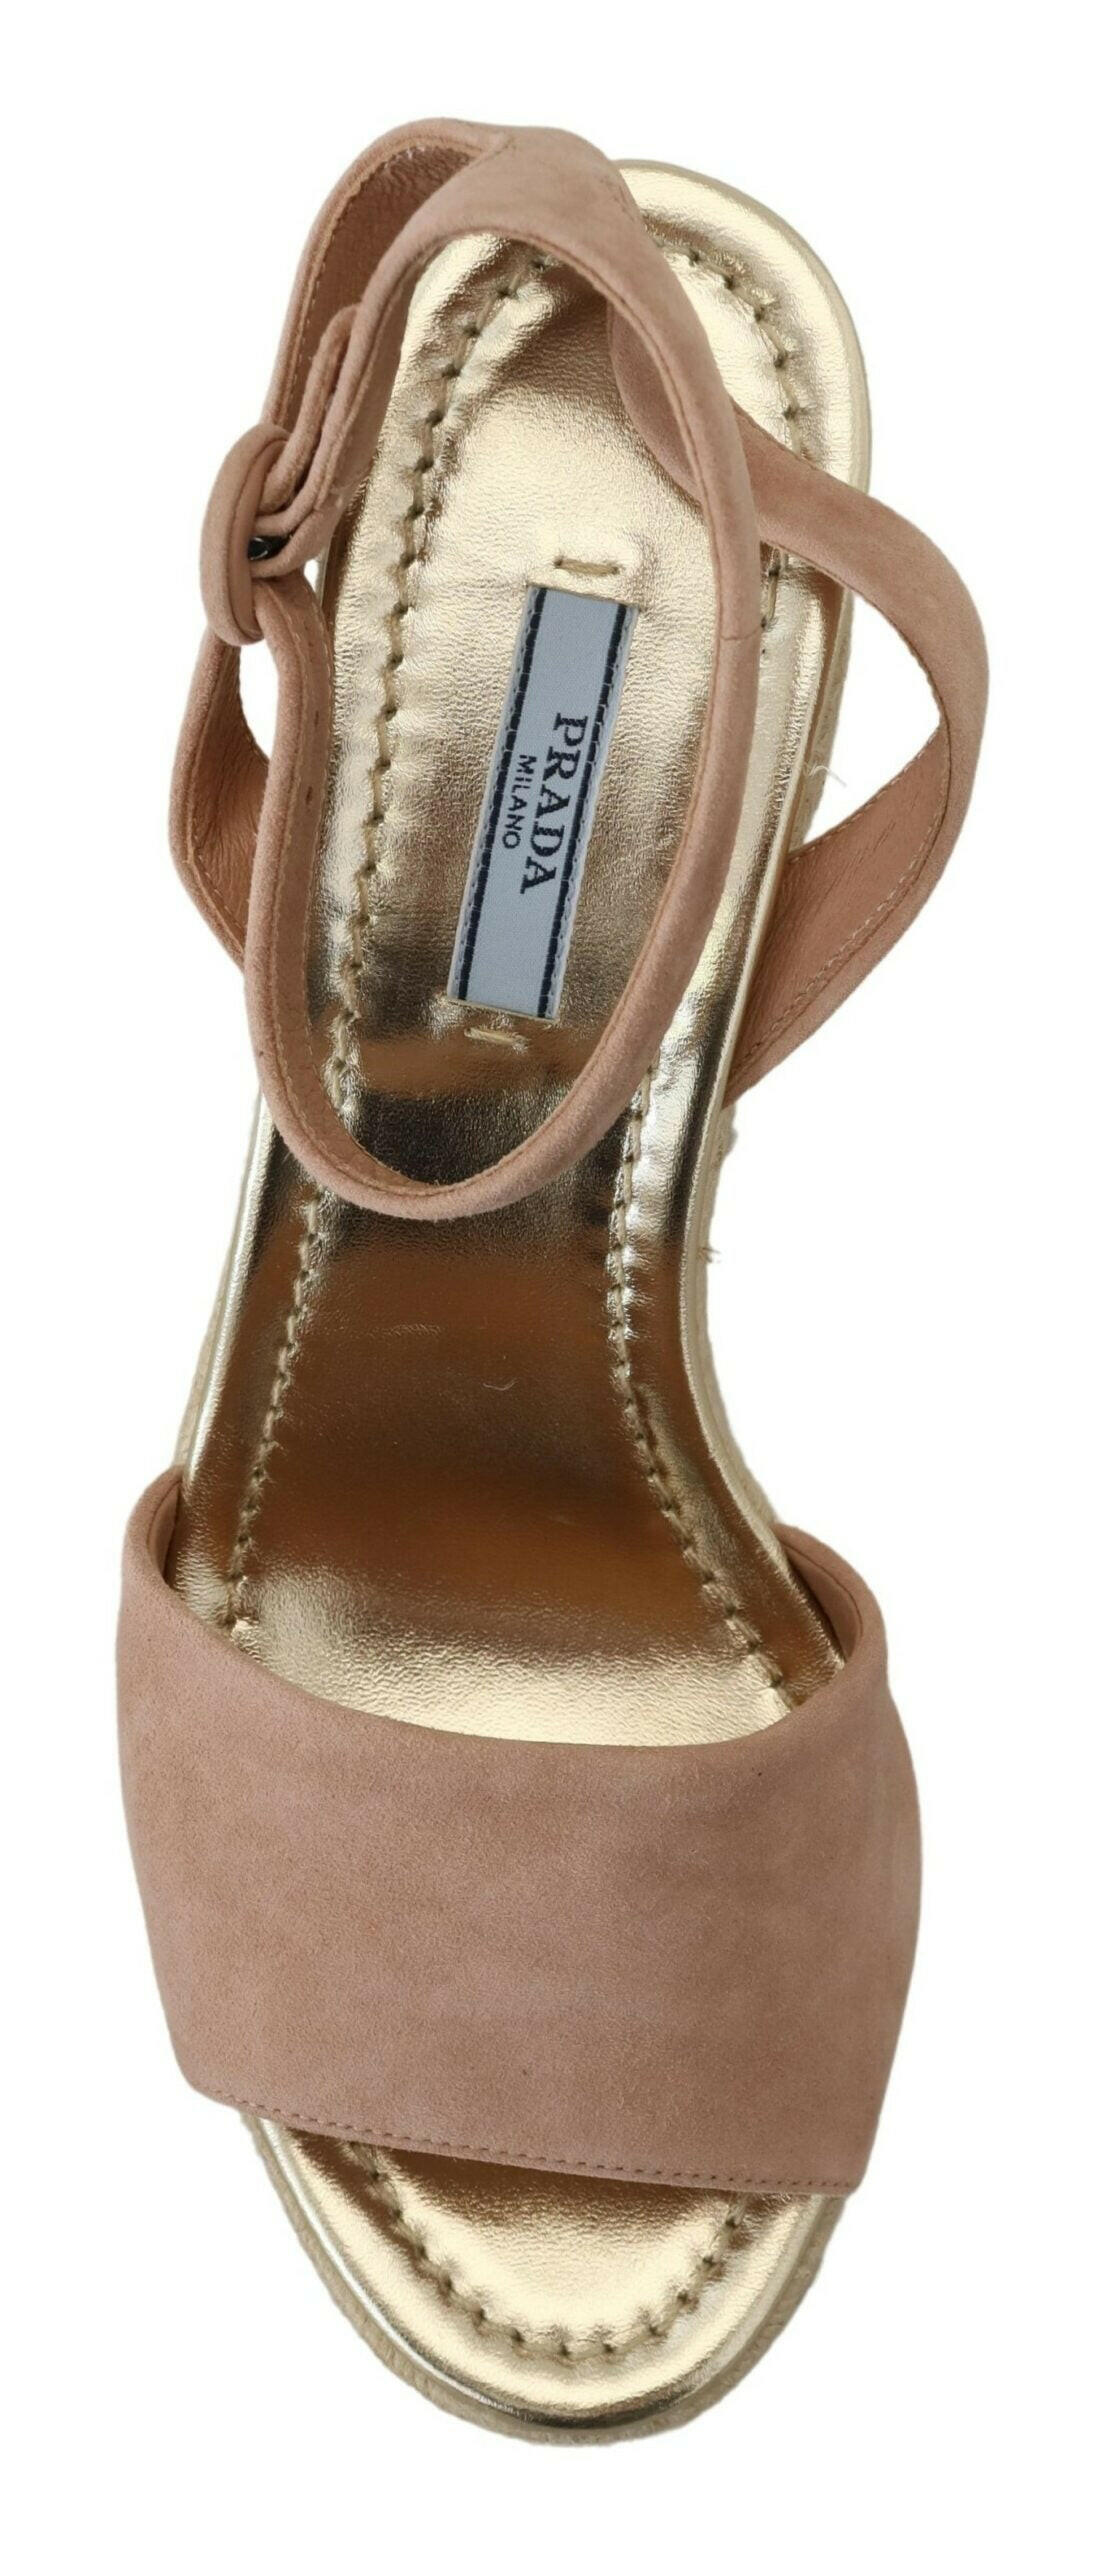 Prada Pink Suede Leather Ankle Strap Sandals - GENUINE AUTHENTIC BRAND LLC  